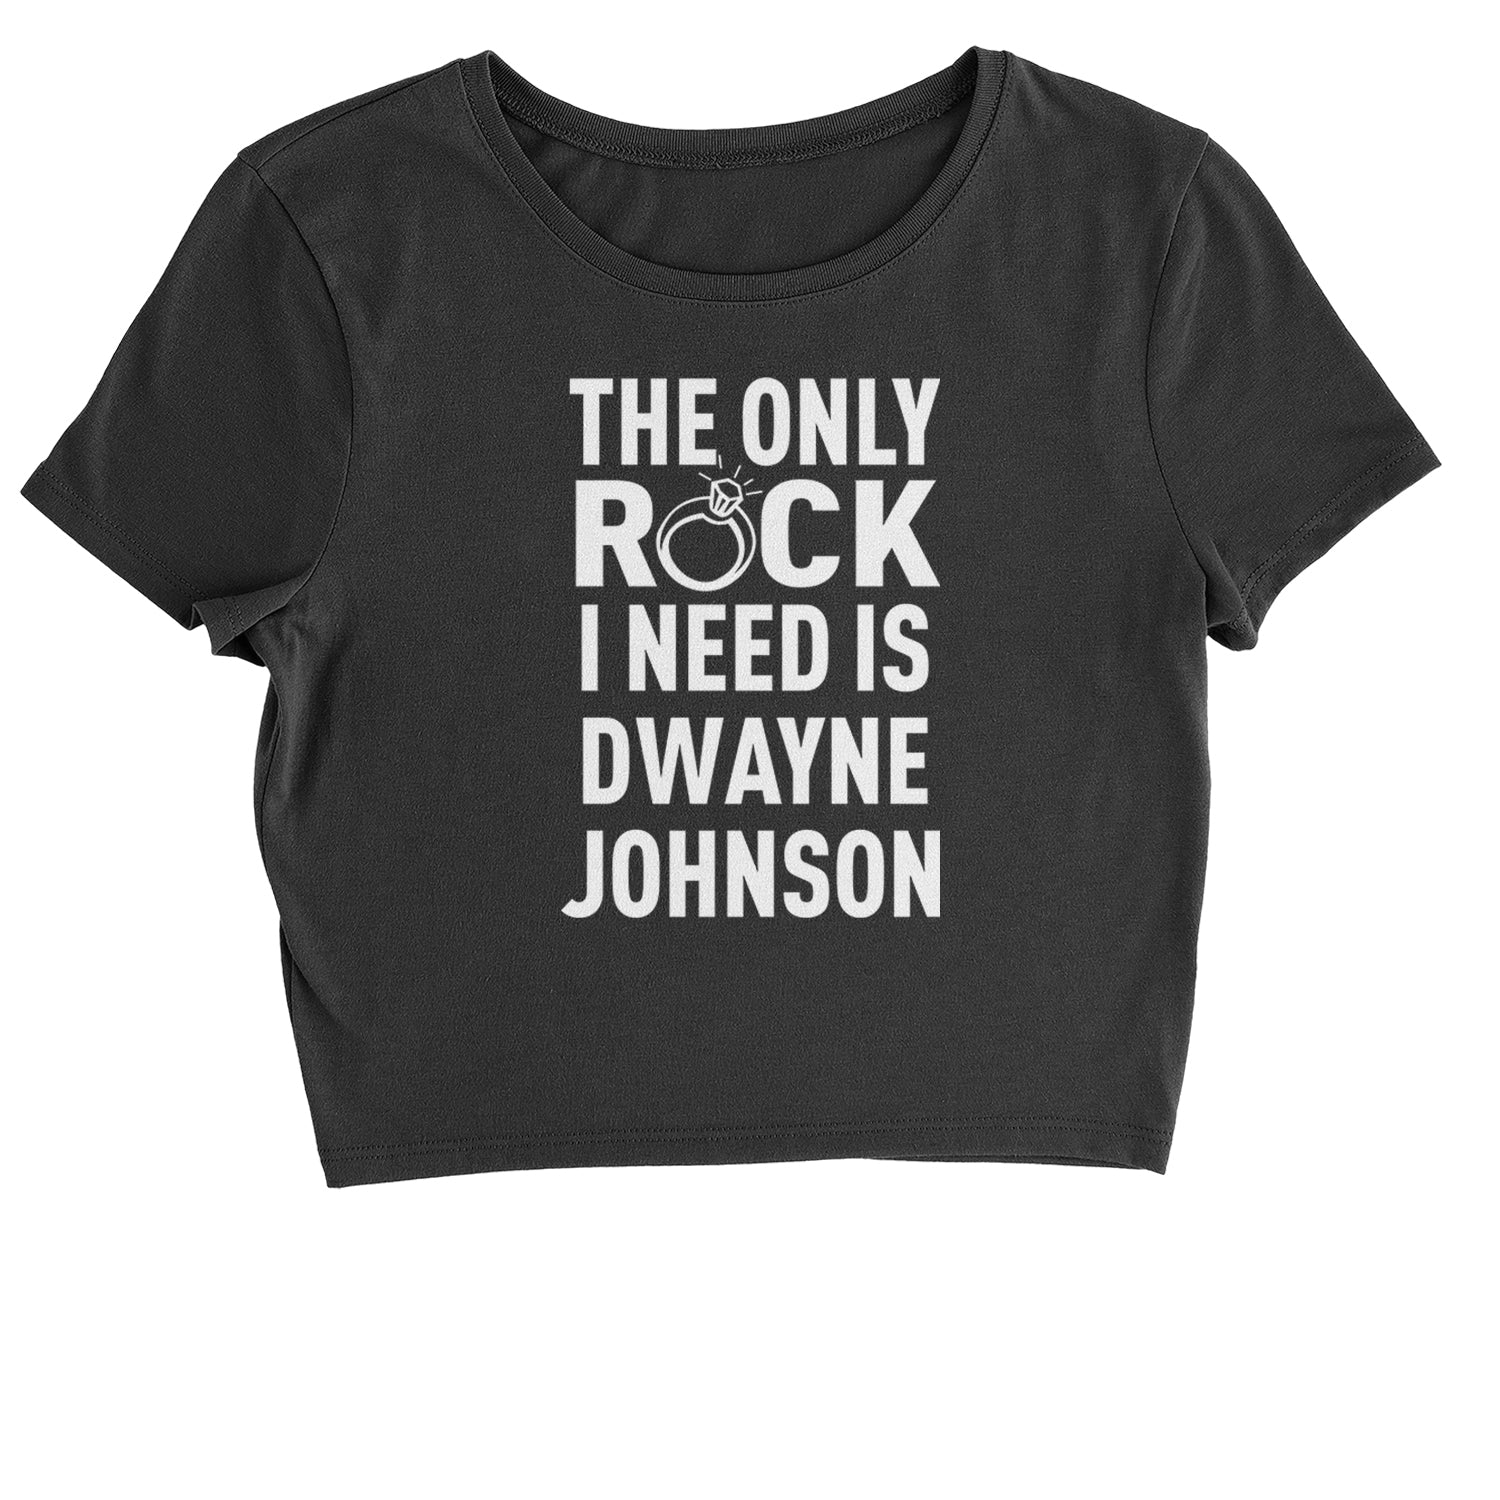 The Only Rock I Need Is Dwayne Johnson Cropped T-Shirt dwayne, johnson, marry, me, ring, rock, the, wedding by Expression Tees